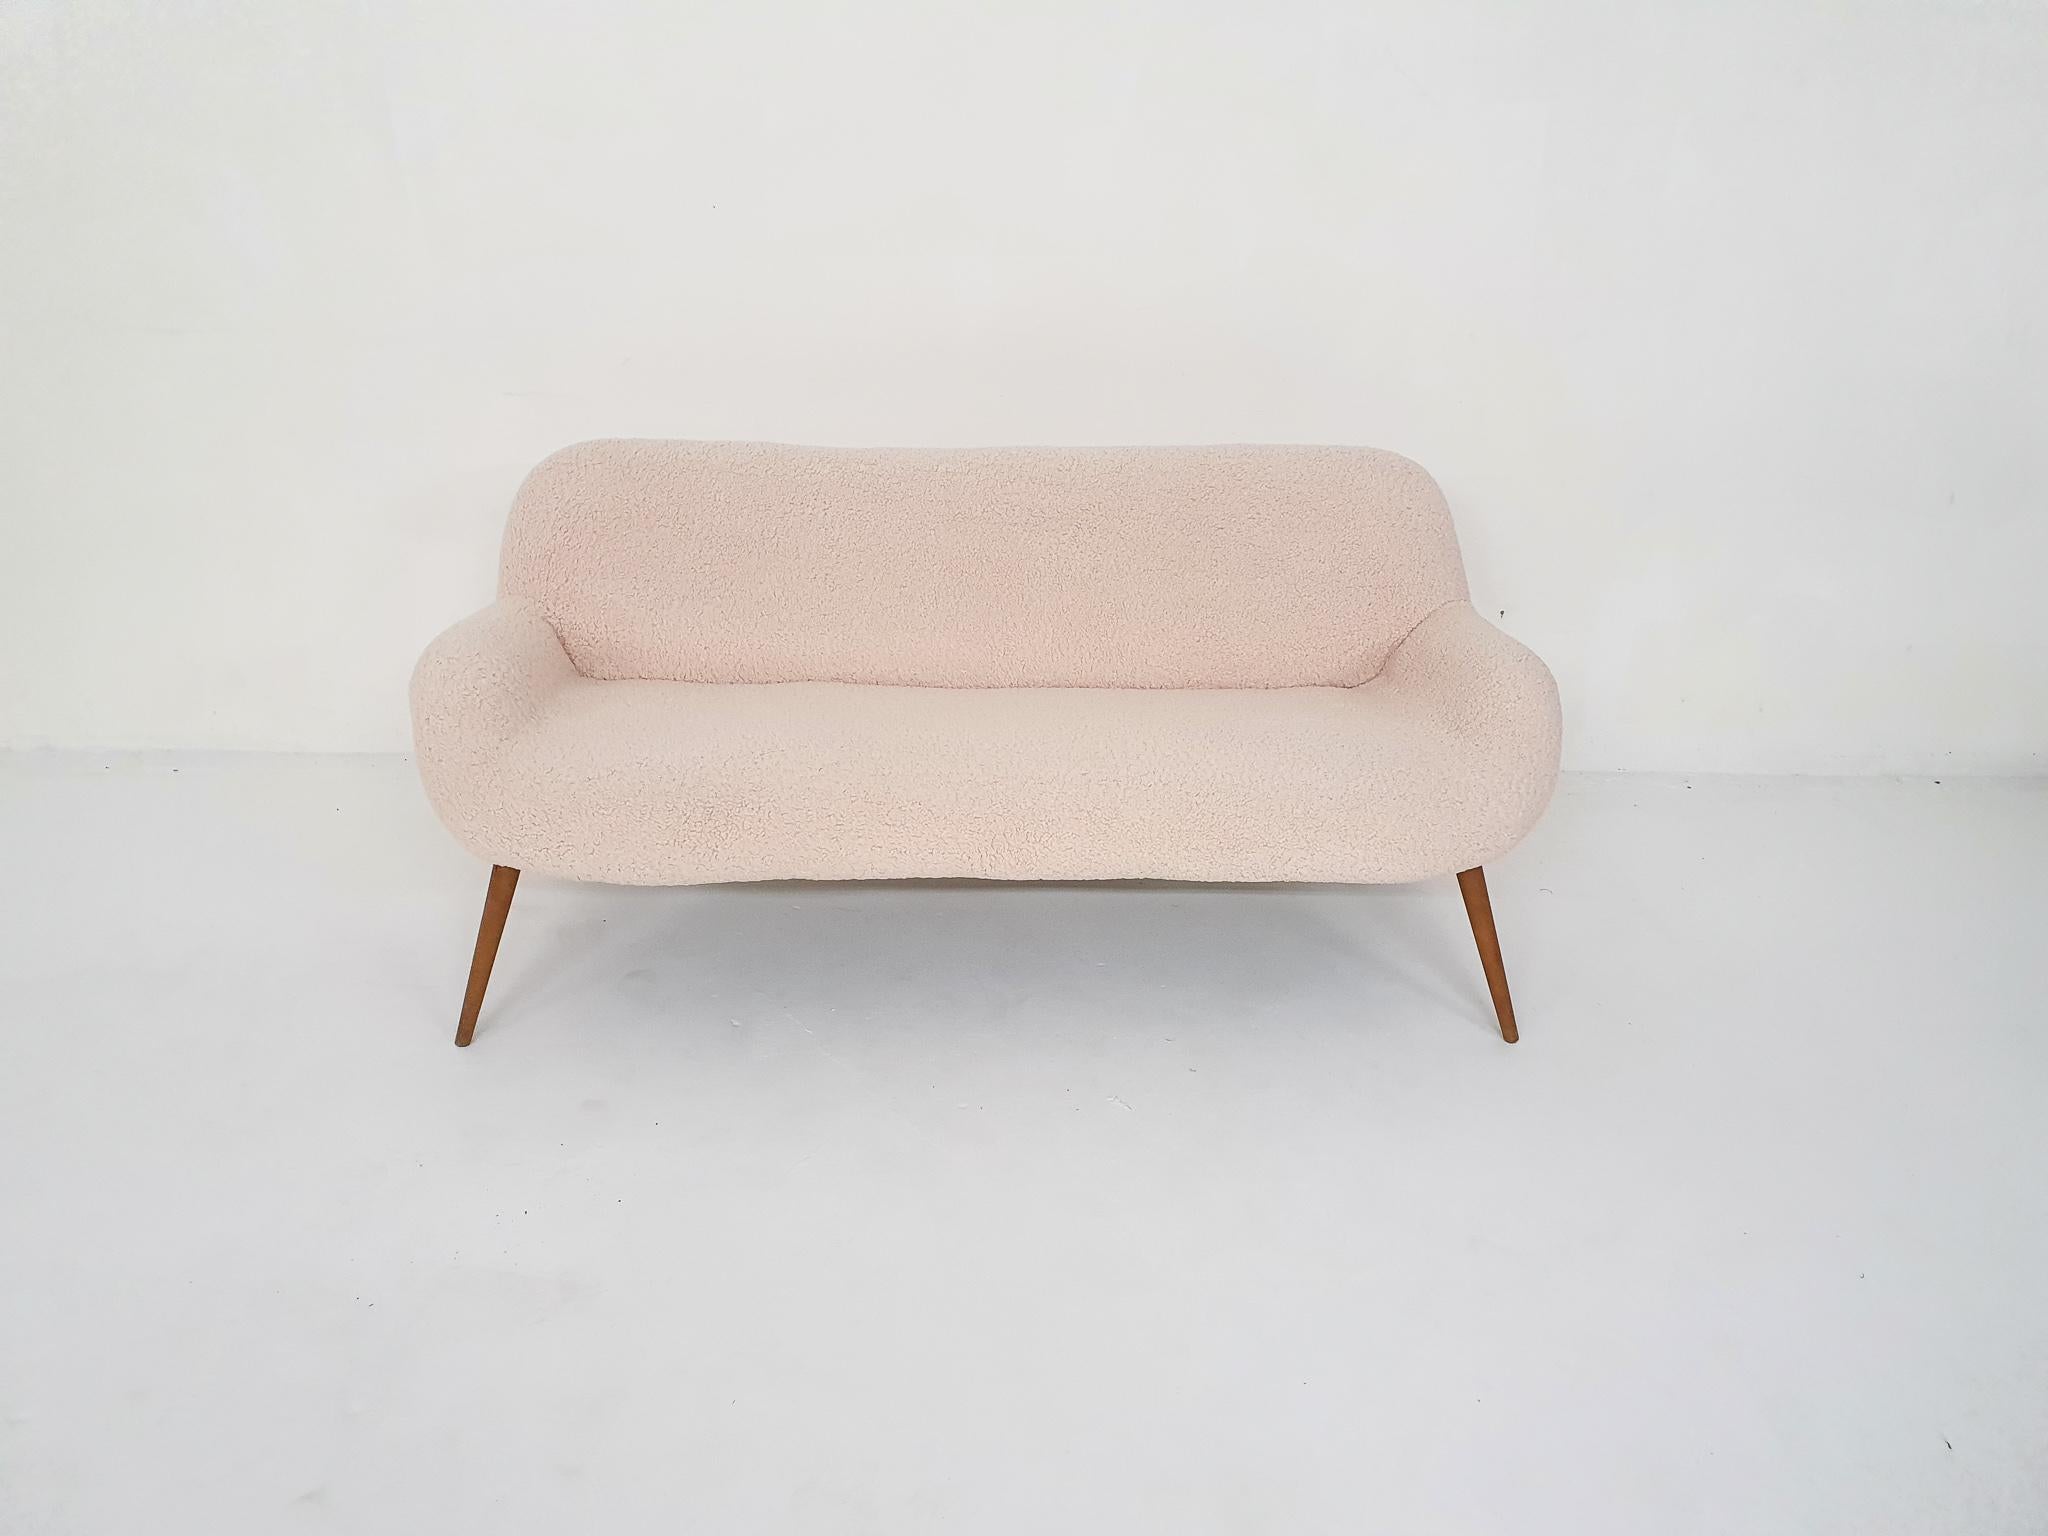 Scandinavian Modern sofa, re-upholstered in beige boucle fabric and teak legs. In the style of Nanna Ditzel.